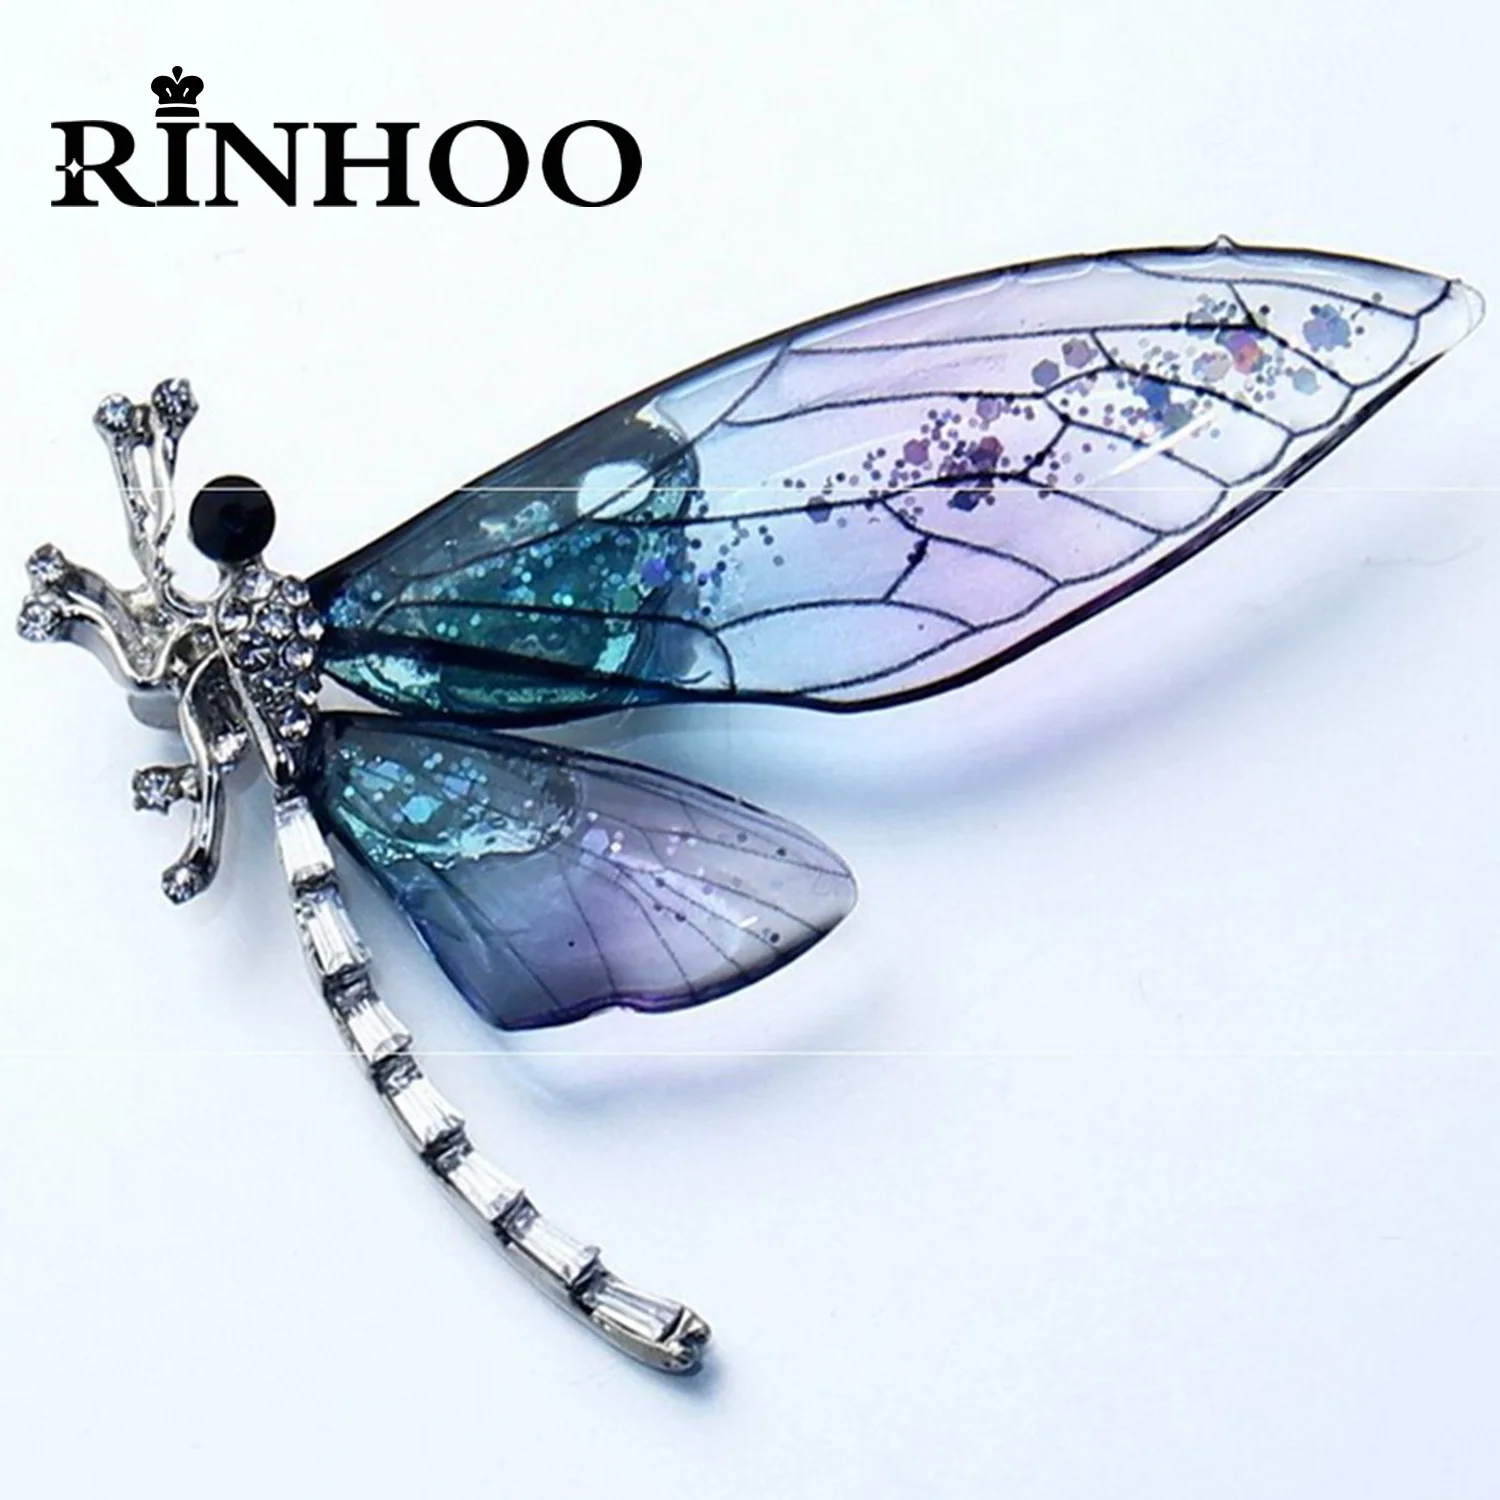 

Rinhoo Elegant Sequin Acrylic Wings Flying Dragonfly Brooches For Women Fashion Rhinestone Insect Animal Pin Badge Party Jewelry